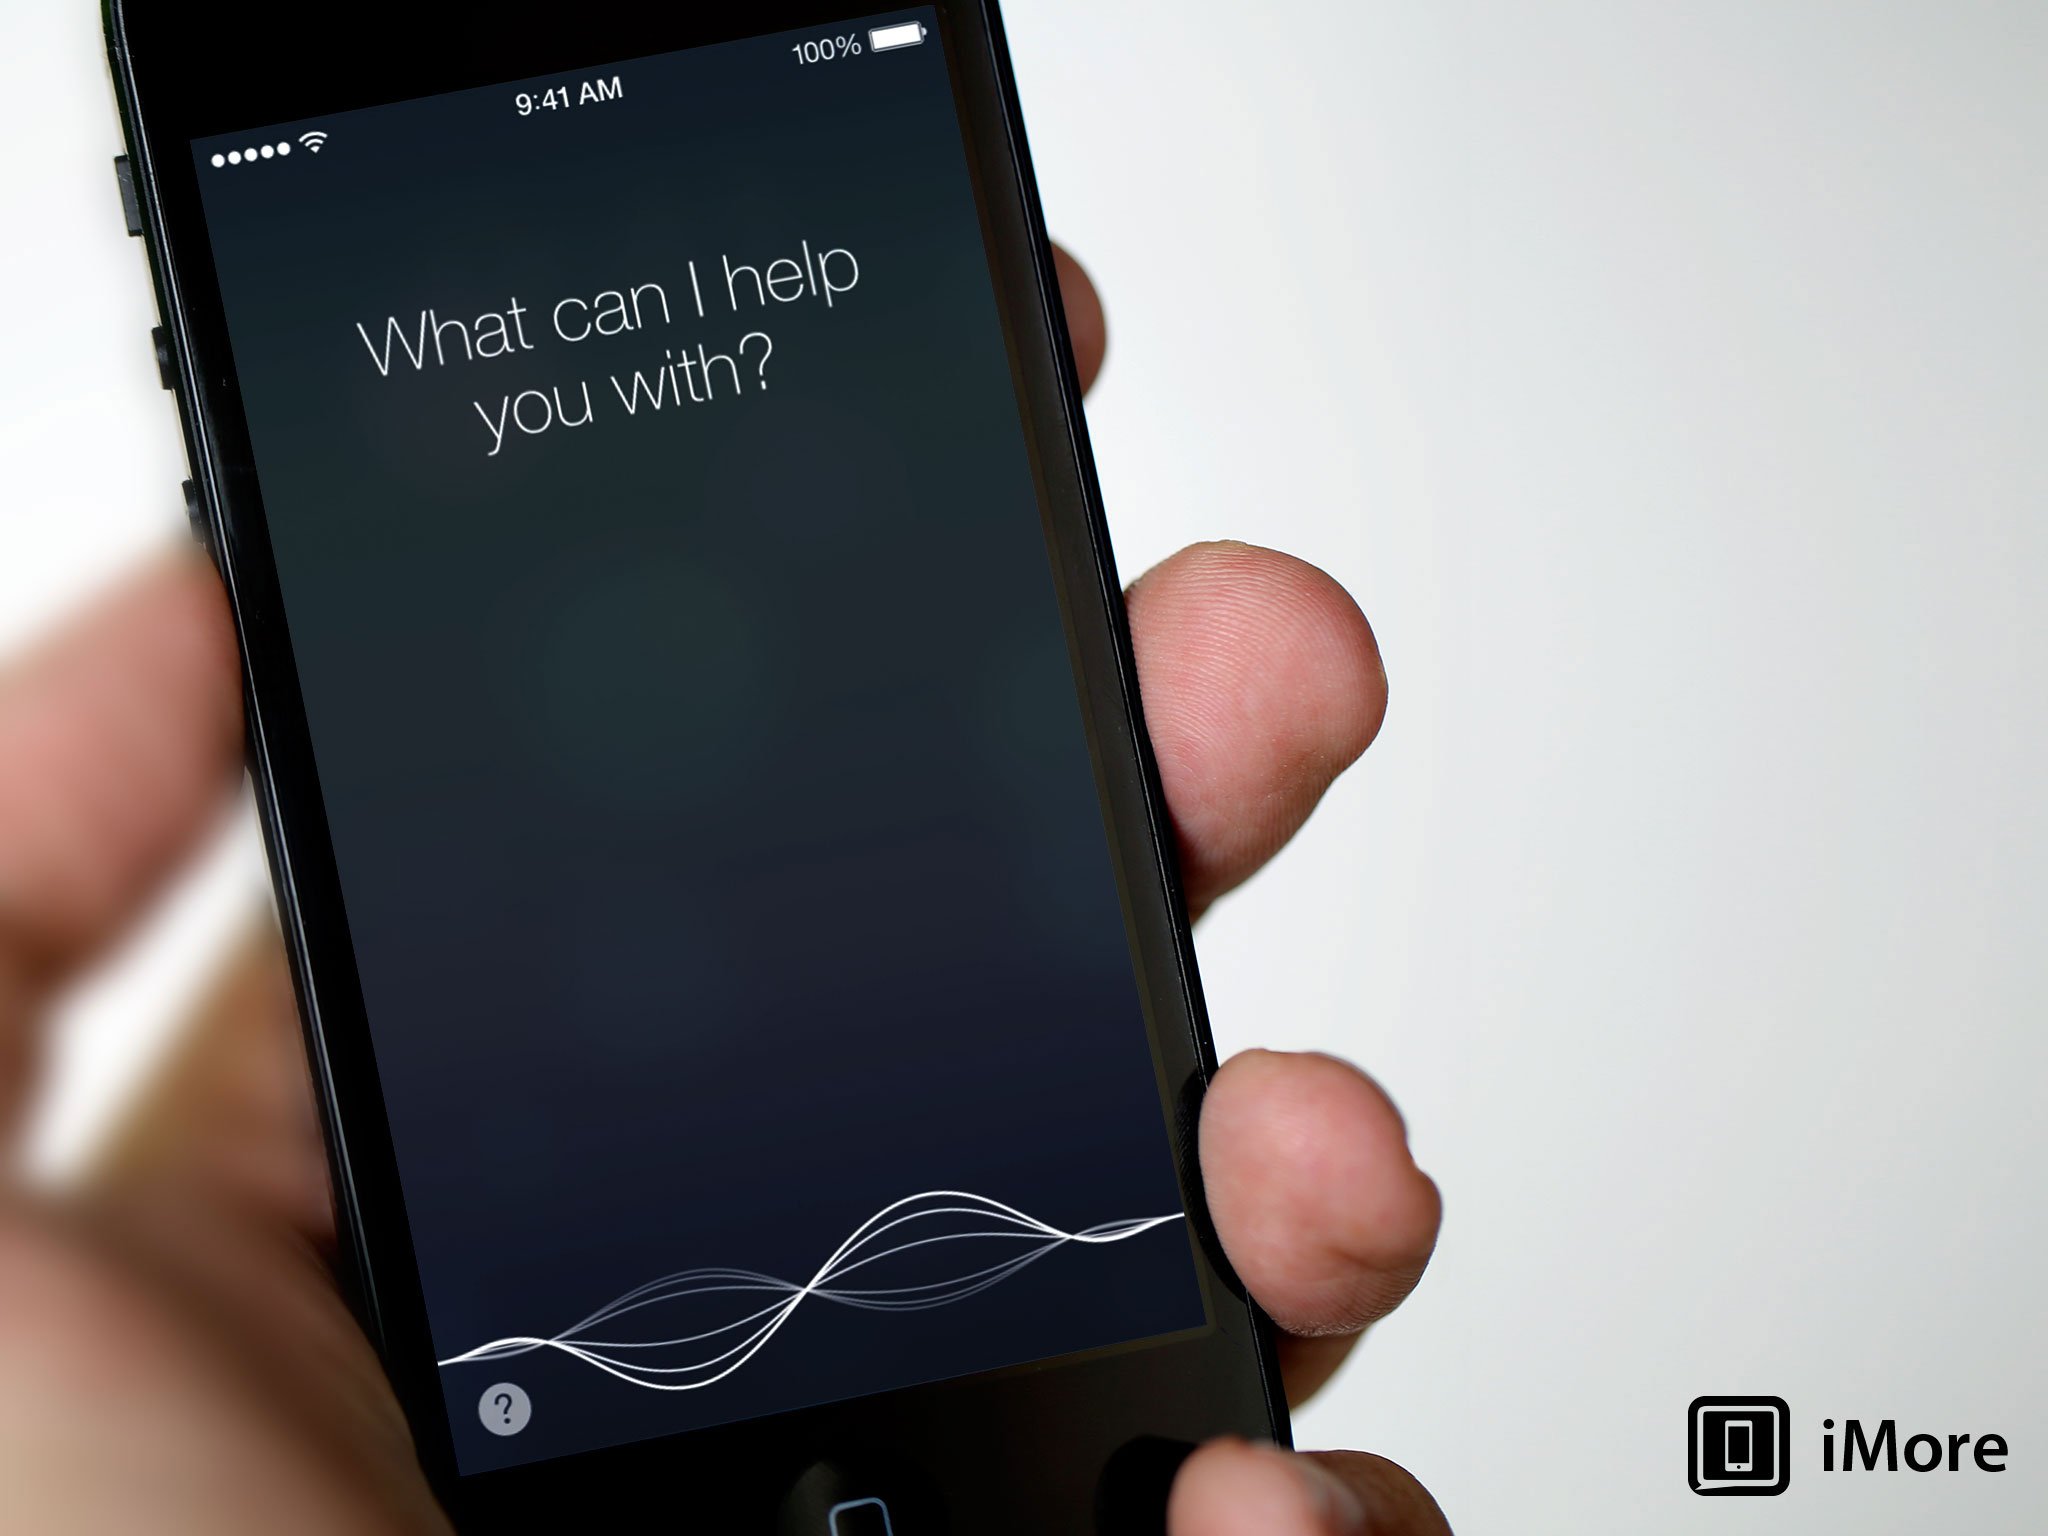 Would you want Siri to be 'always listening' for your voice commands?